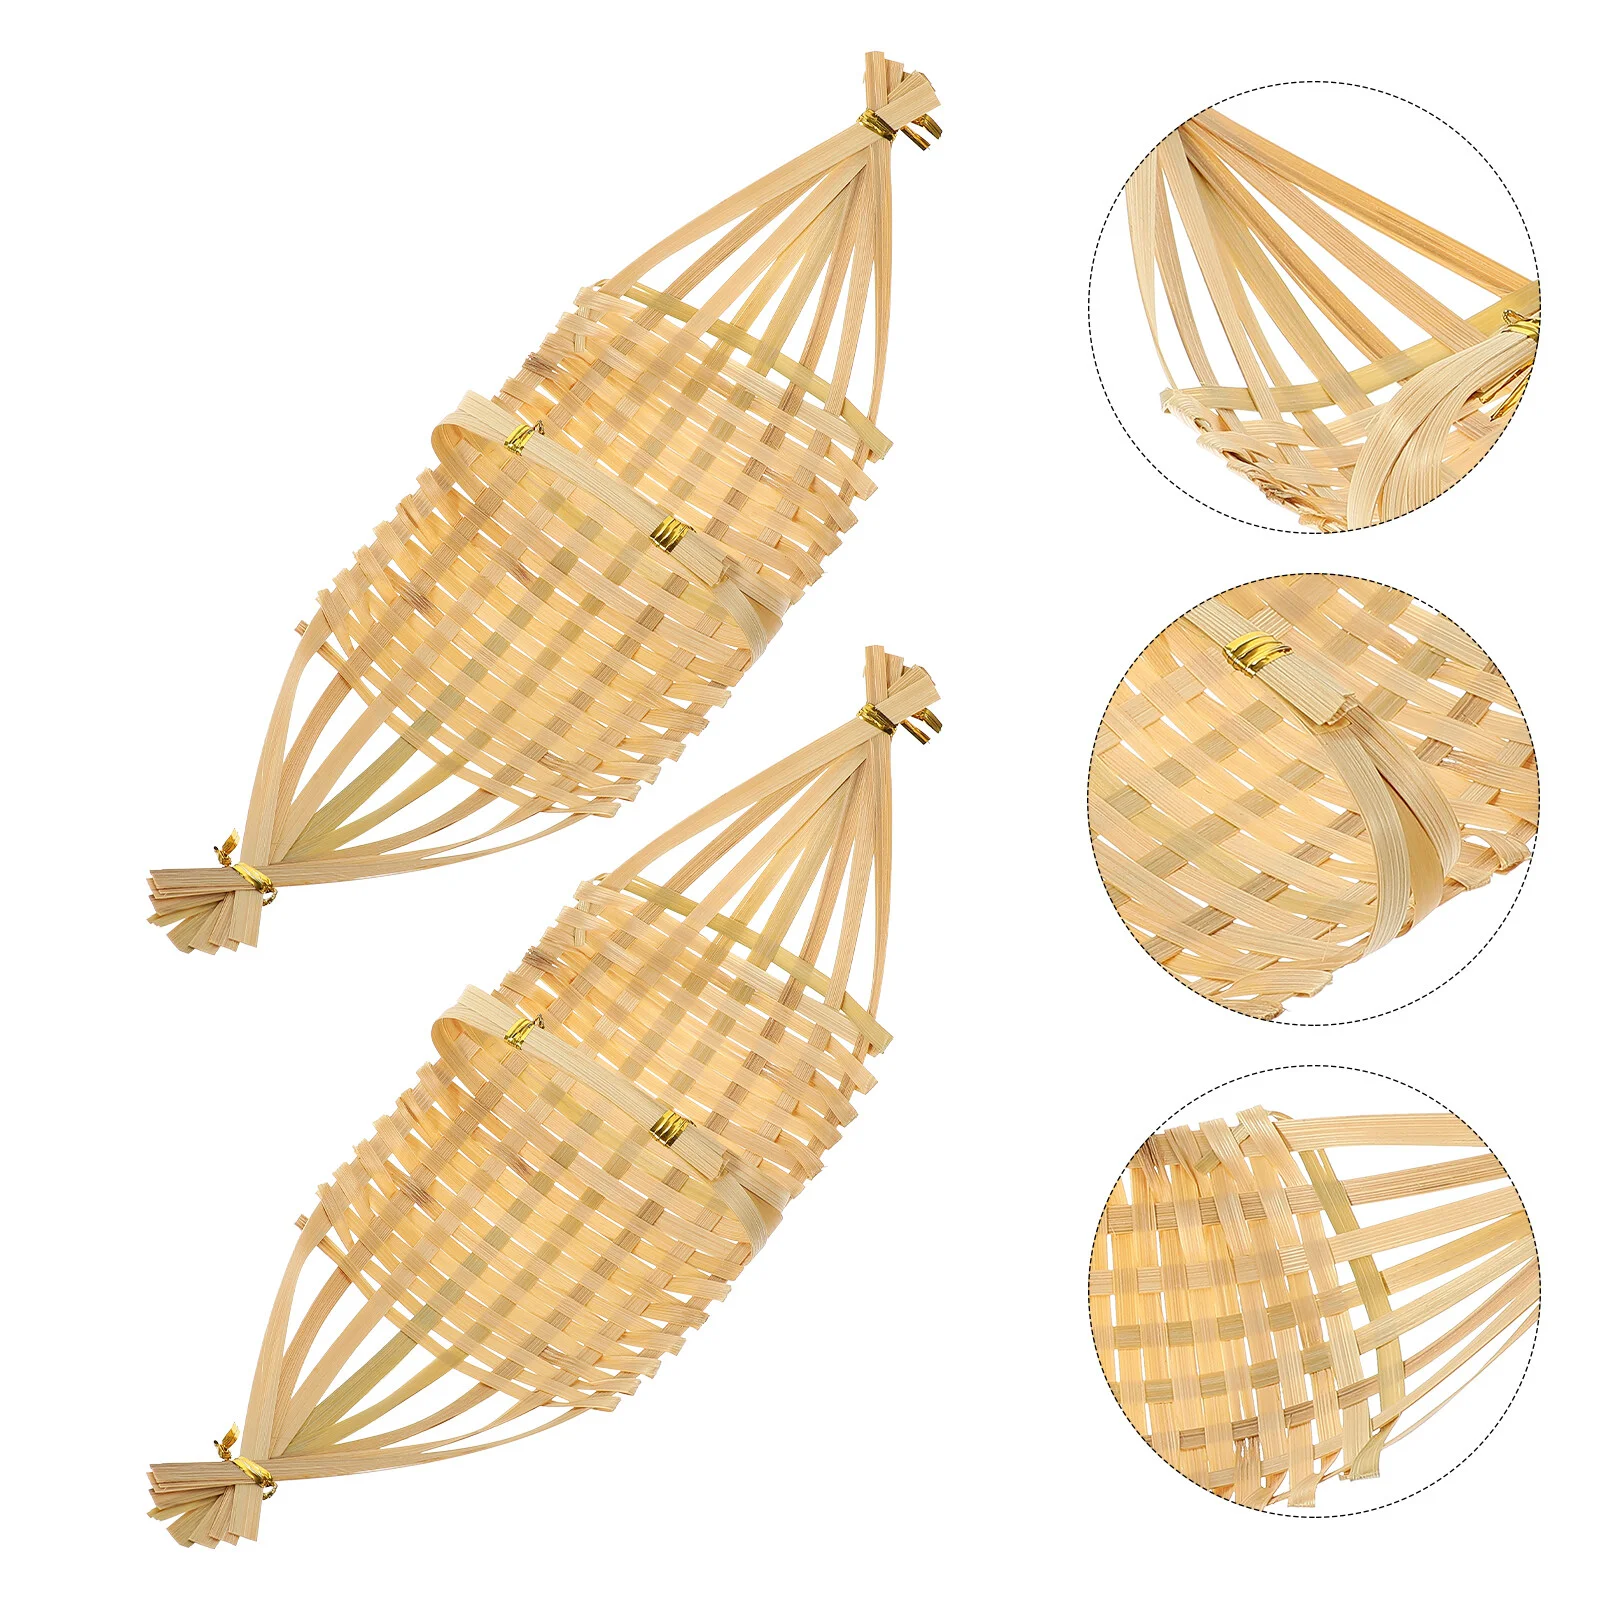 

2 Pcs Bamboo Lampshade Creative Fruit Basket Food Storage Container Weave Made Dried Tray Weaving Multi-purpose Baskets Woven